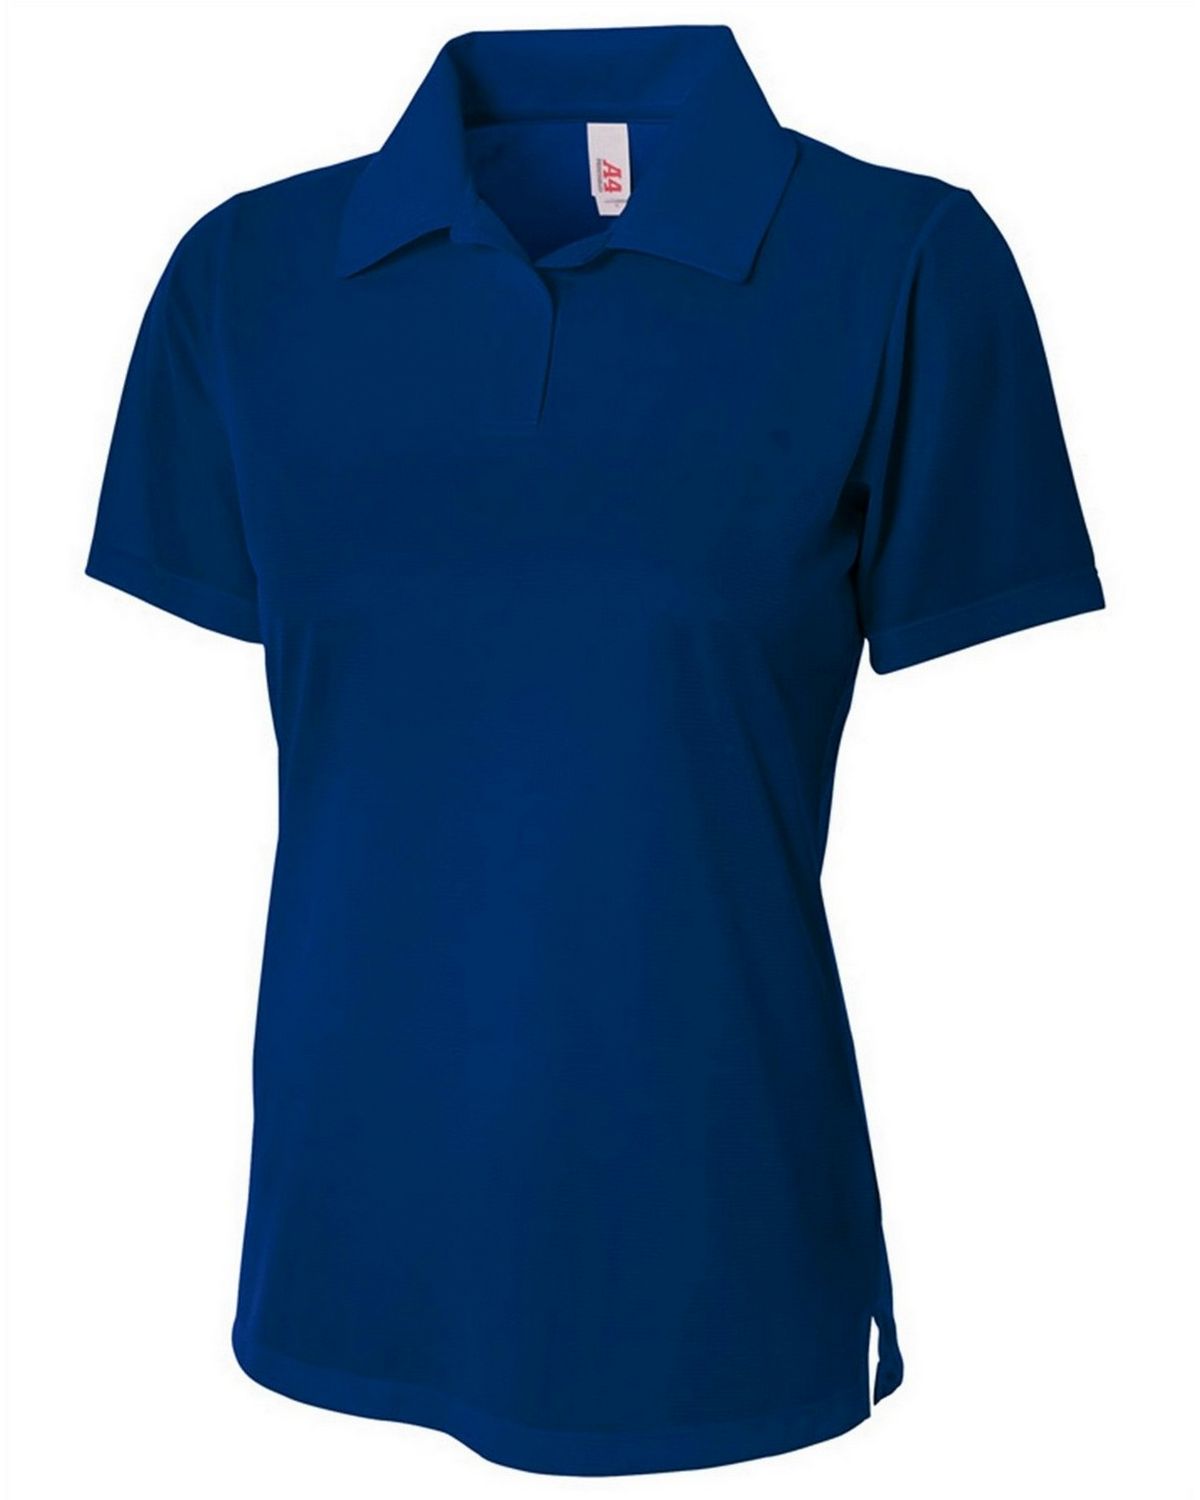 A4 NW3265 Ladies' Warp Knit Performance Polo